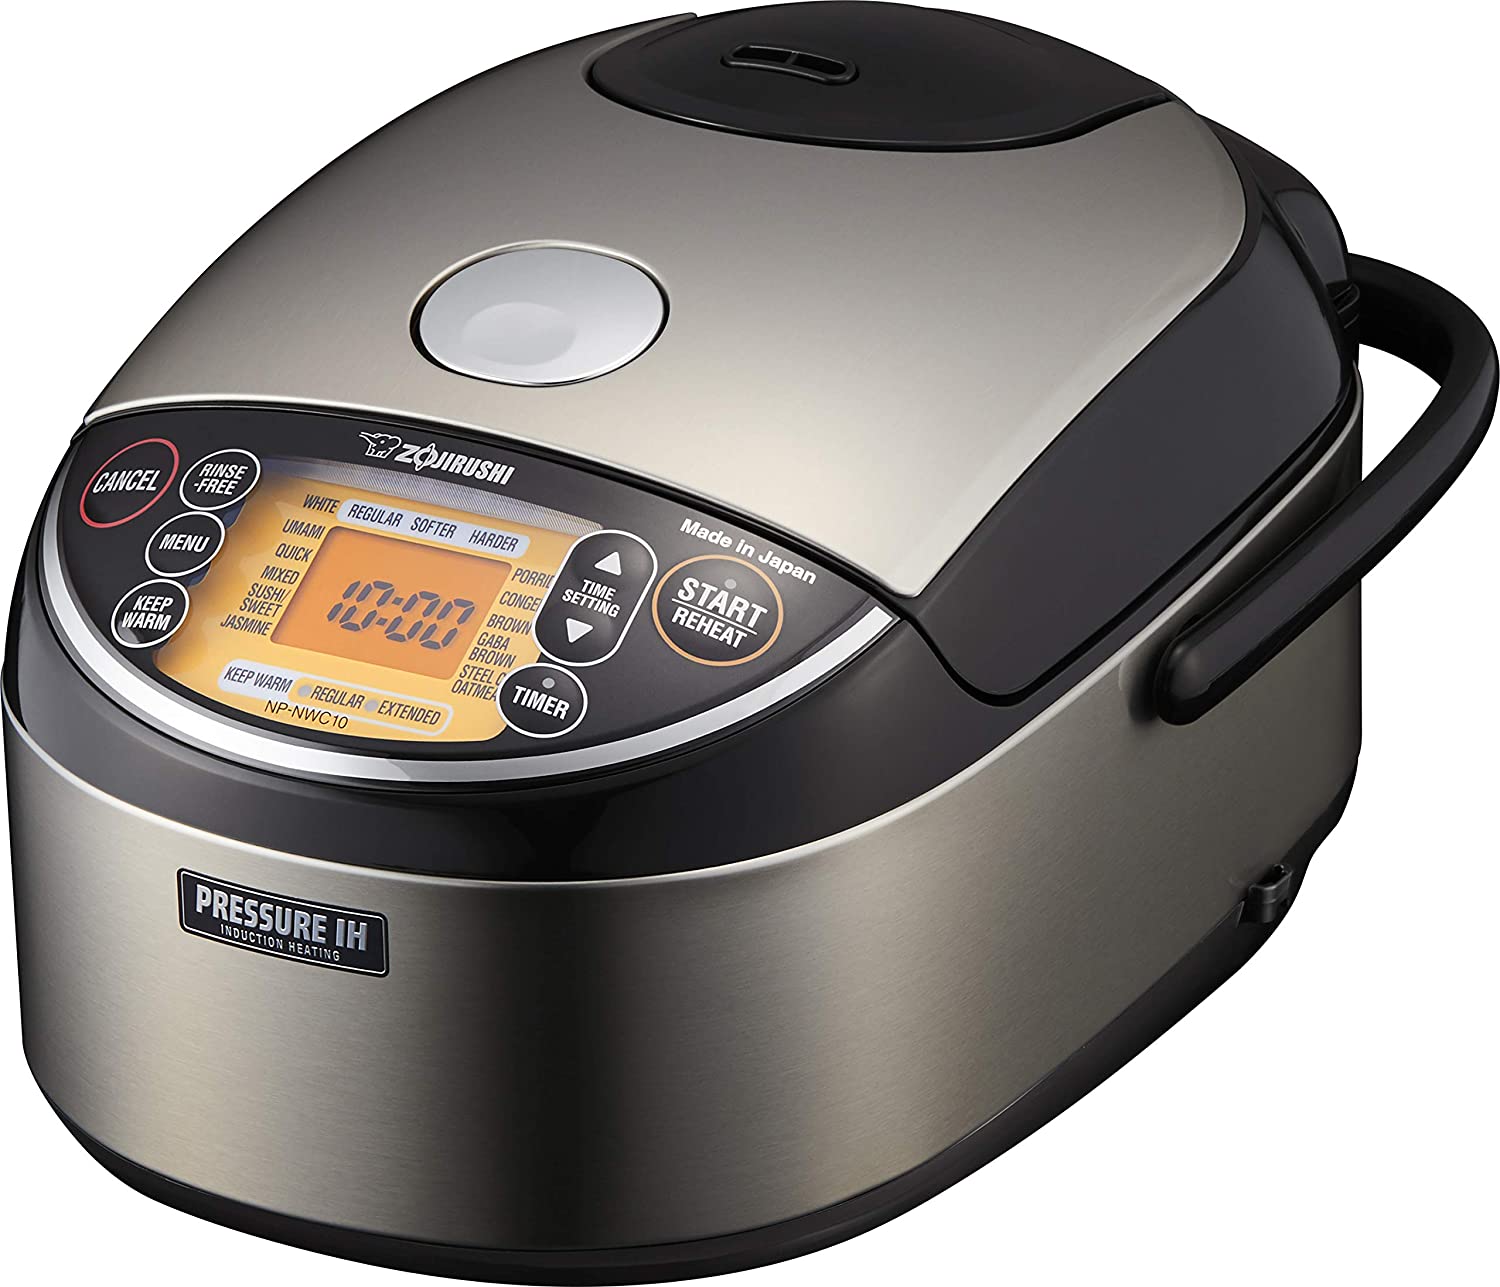 How To Set A Timer On The Zojirushi Rice Cooker